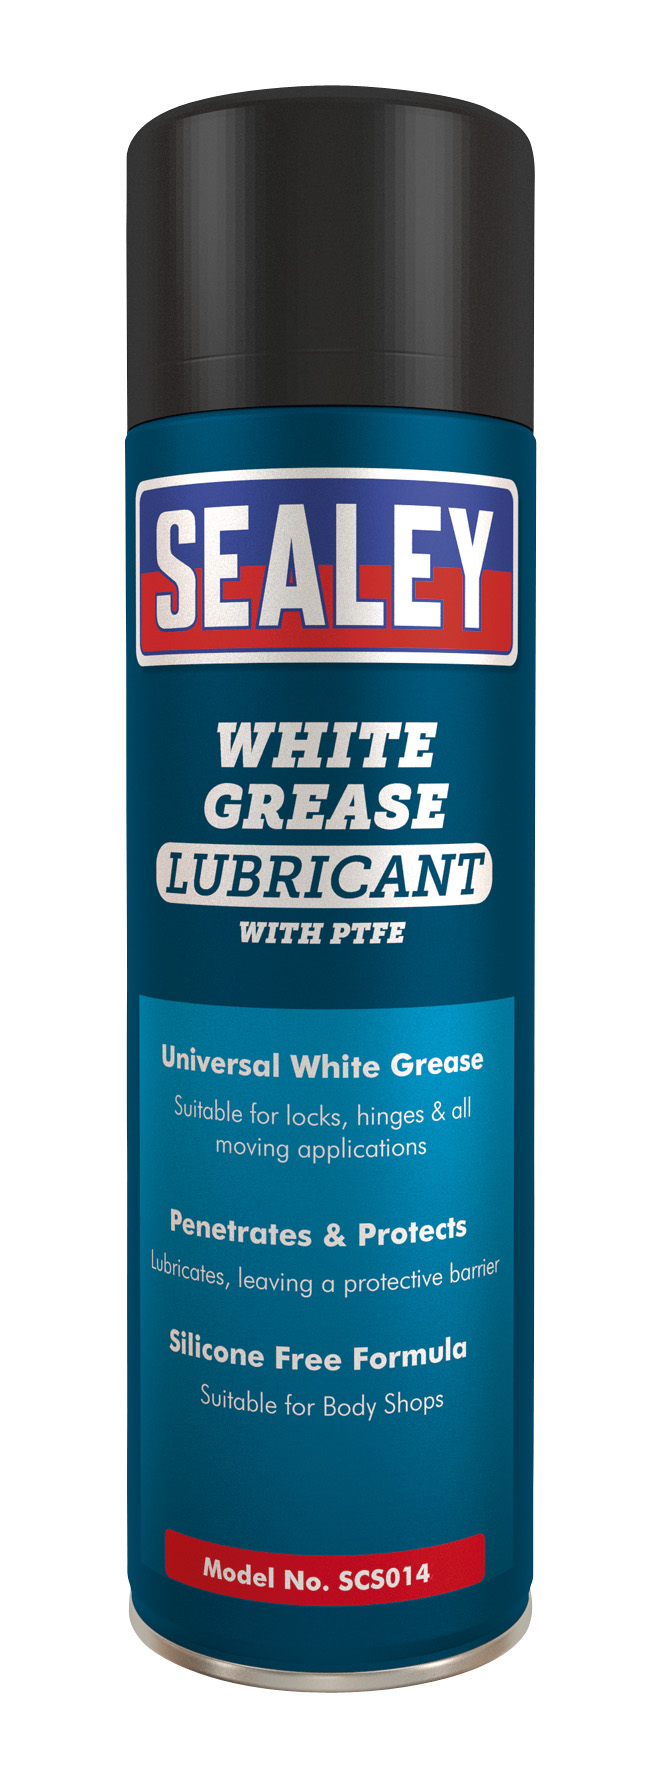 SEALEY WHITE GREASE